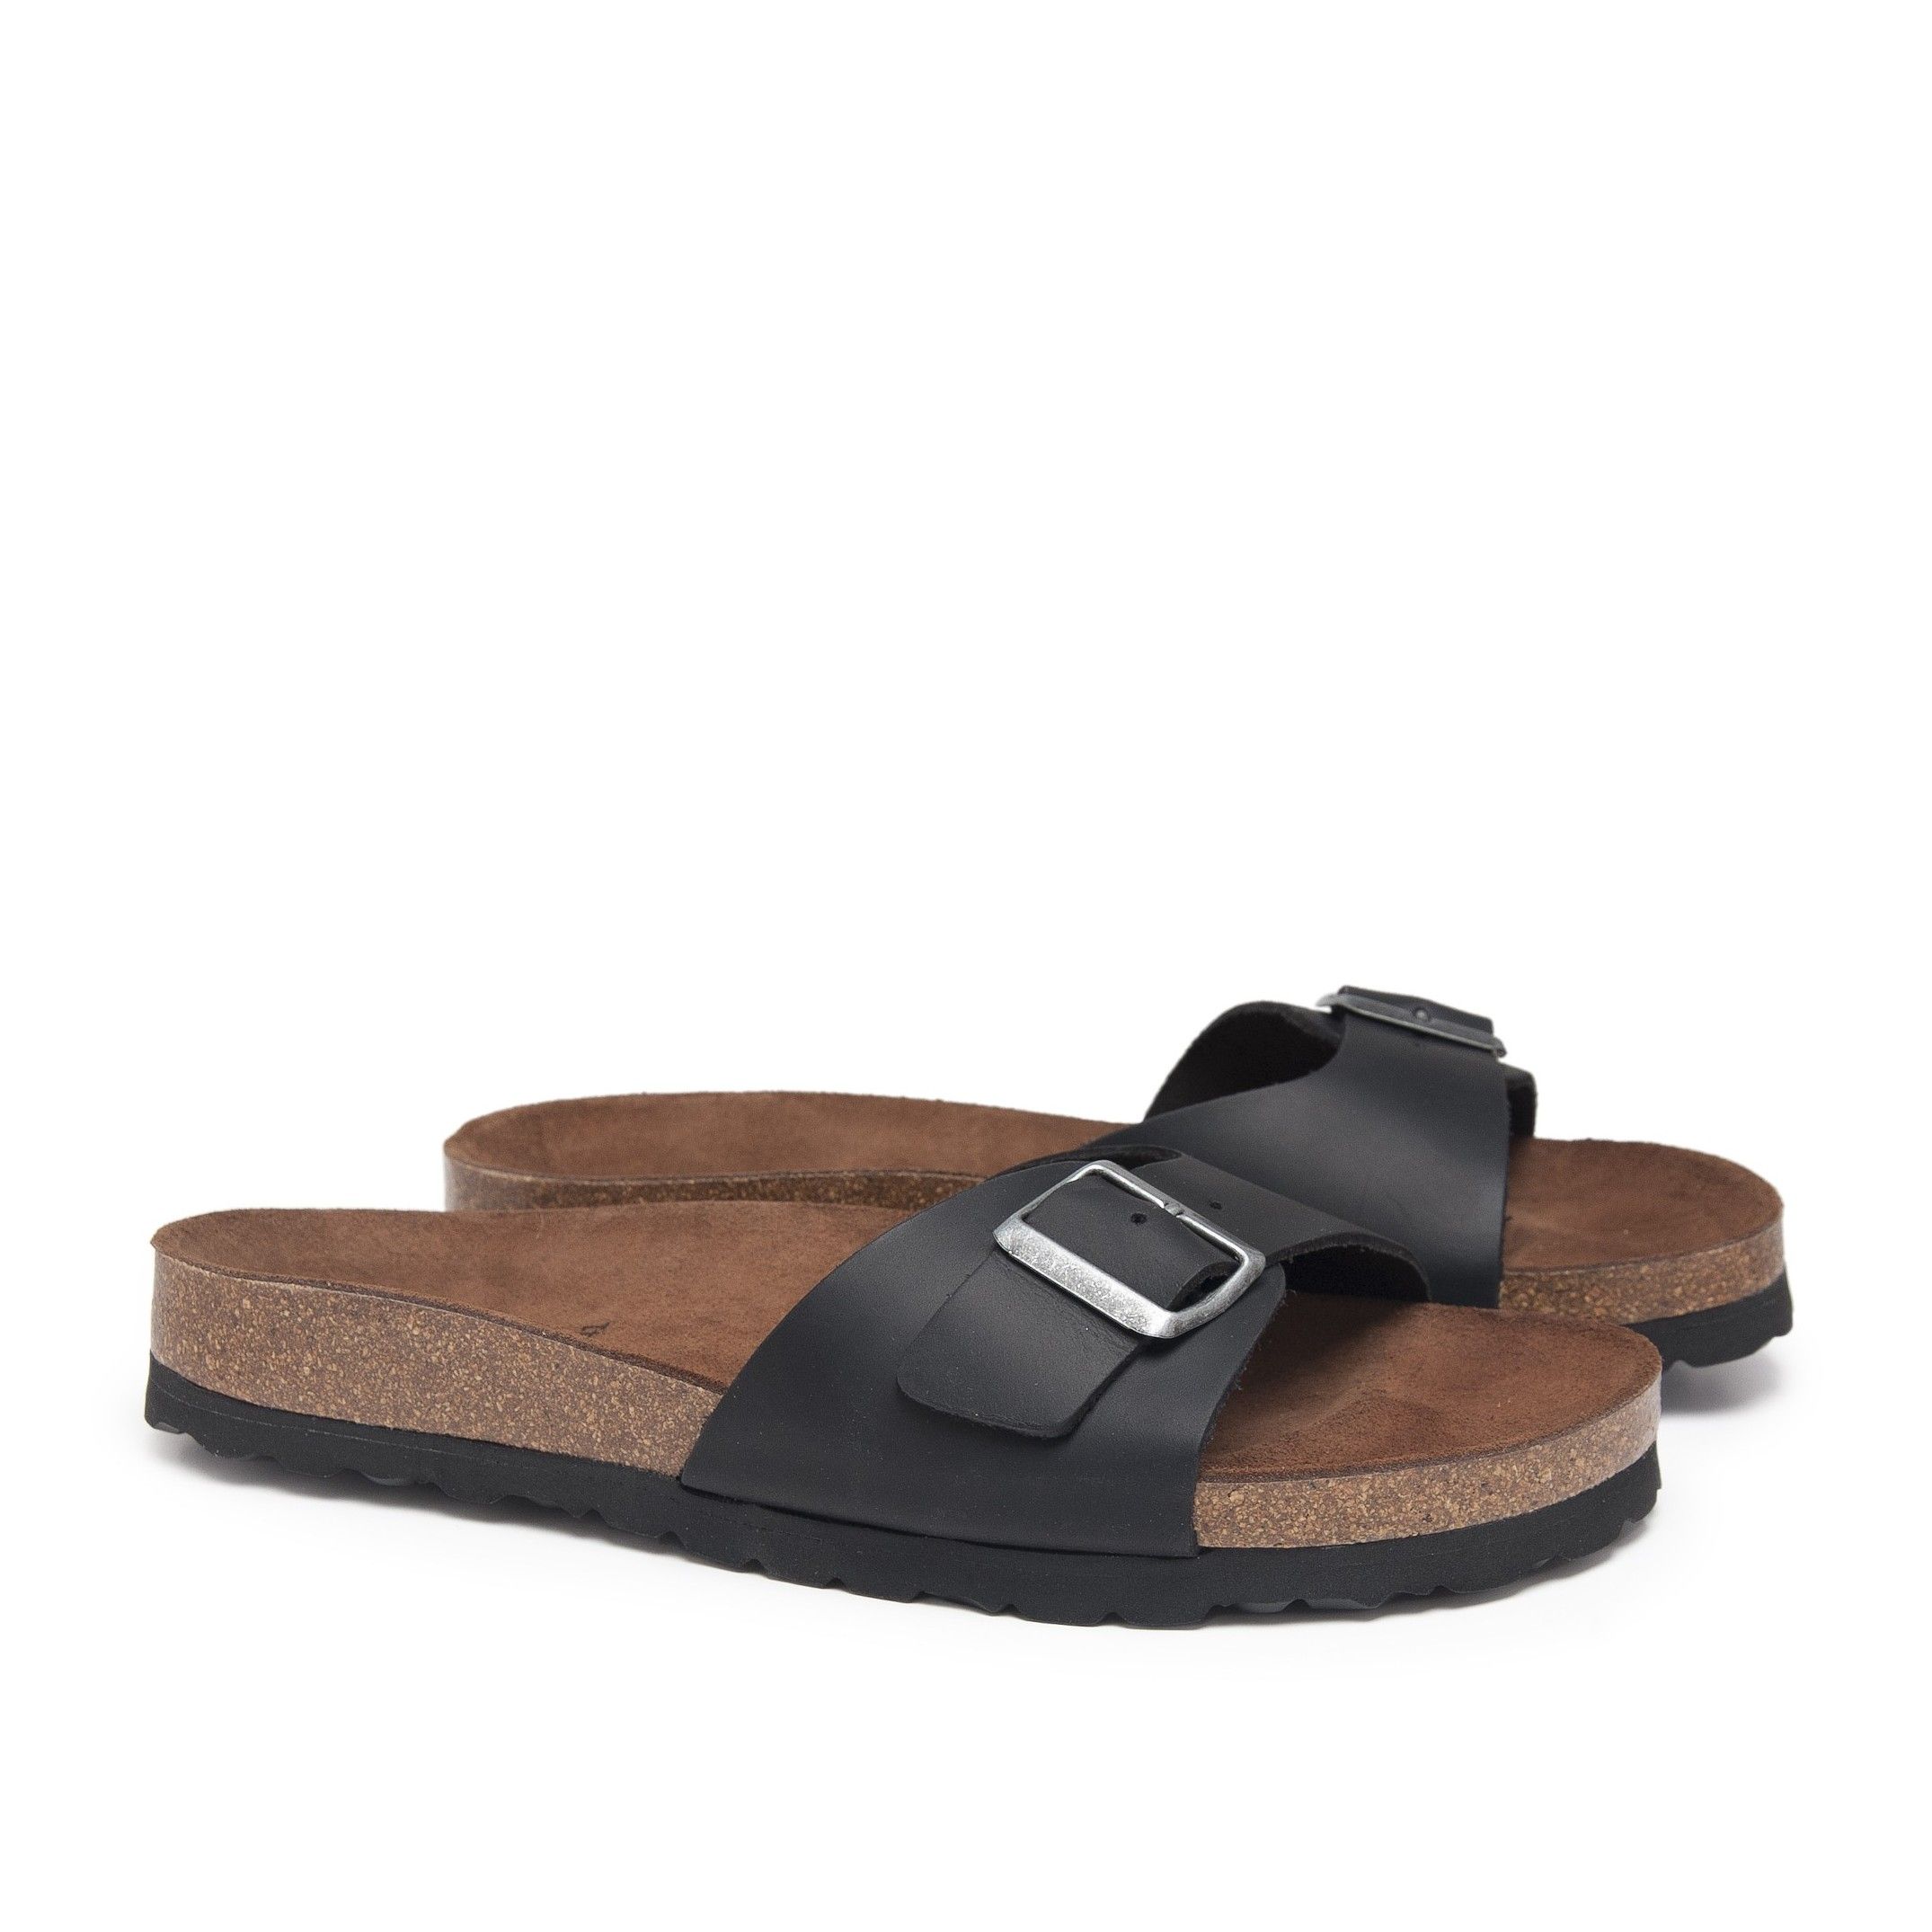 Bio leather sandals with metal buckle. Adjustable metal buckle. Exterior and interior made of leather. Sole: EVA. This product is manufactured in Spain.